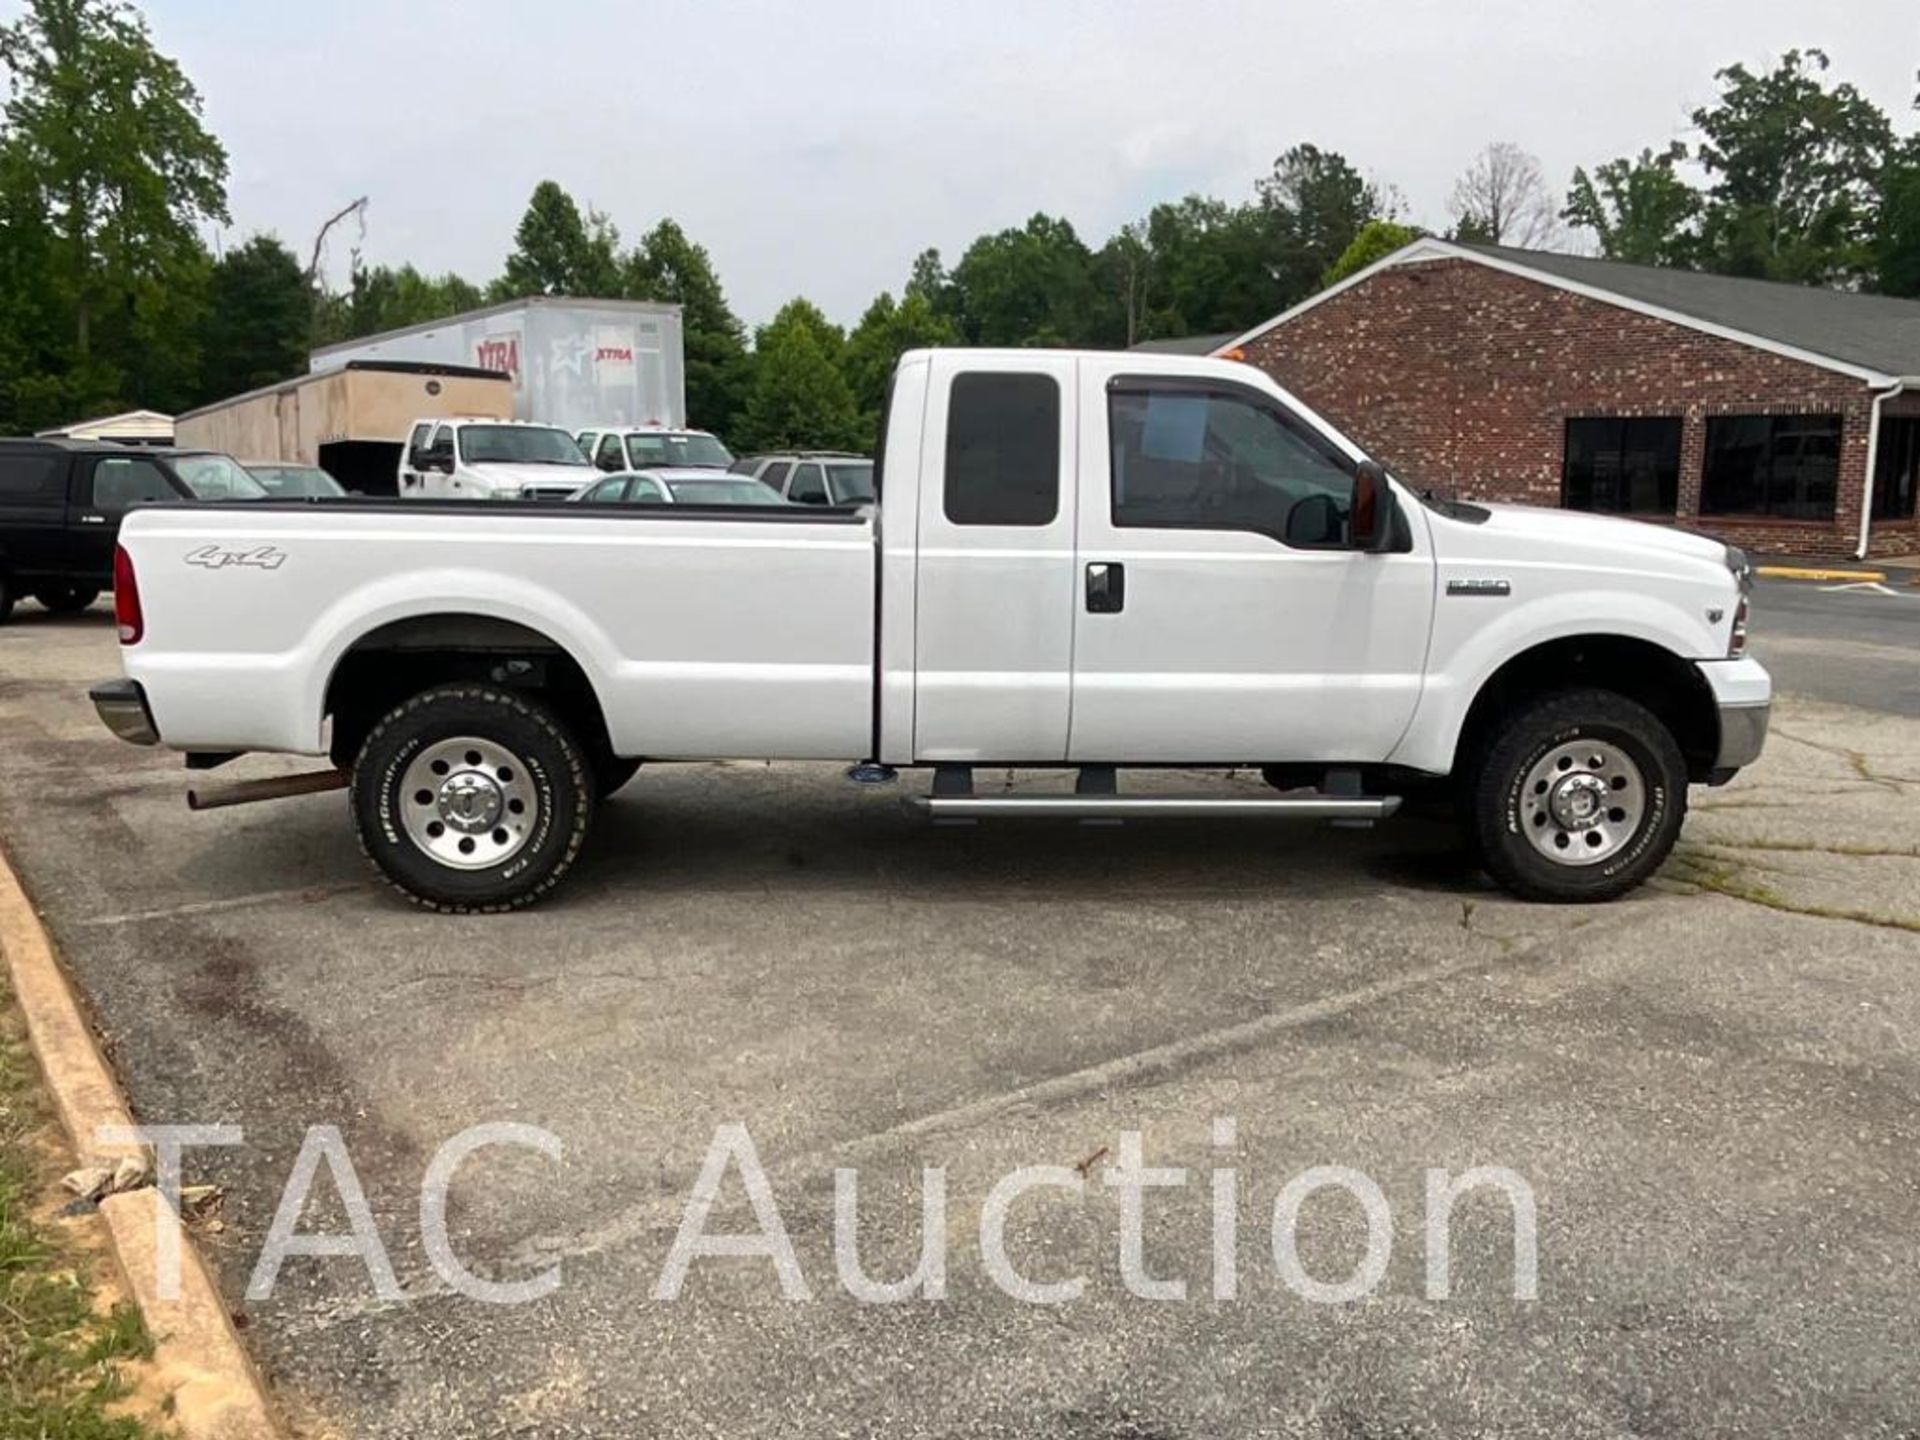 2005 Ford F-250 Super Duty 4x4 Extended Cab Pickup Truck - Image 6 of 42